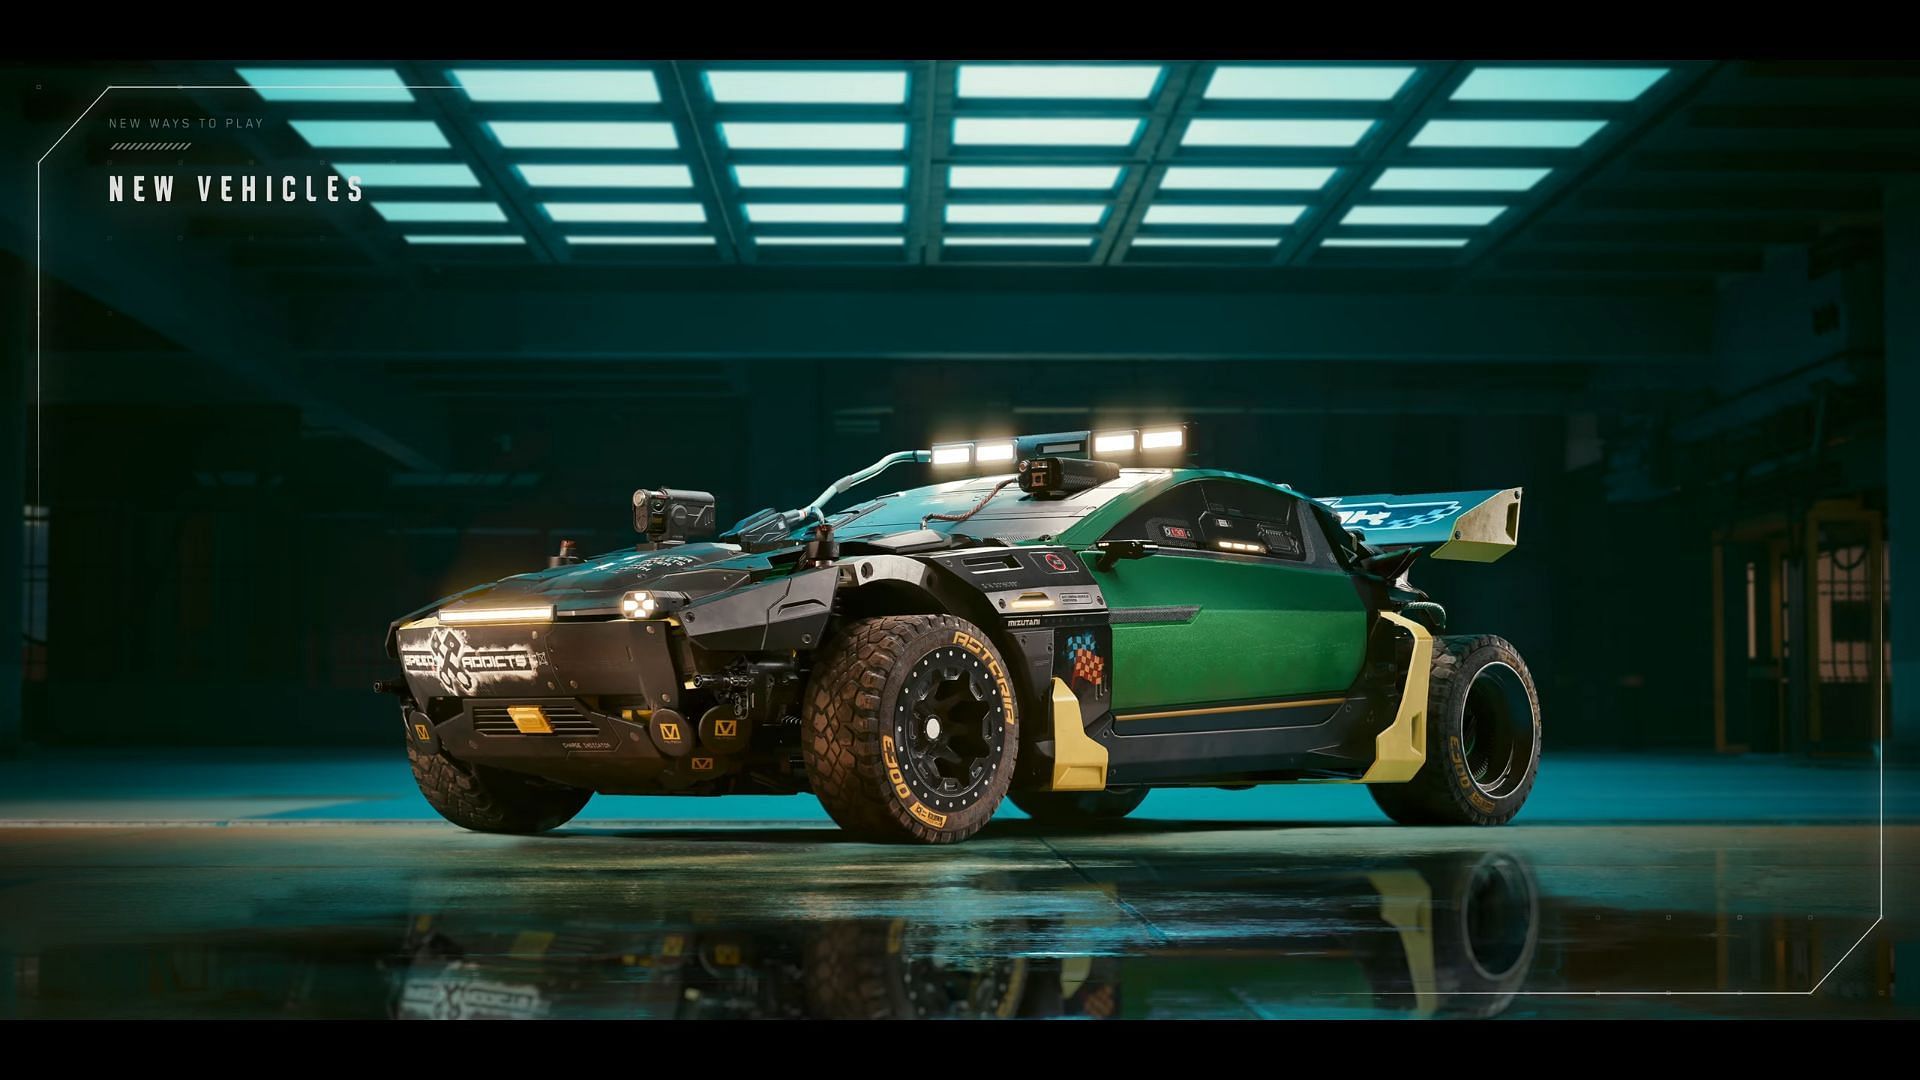 This is one of many new vehicles coming soon to Cyberpunk 2077 (Image via CD Projekt RED)